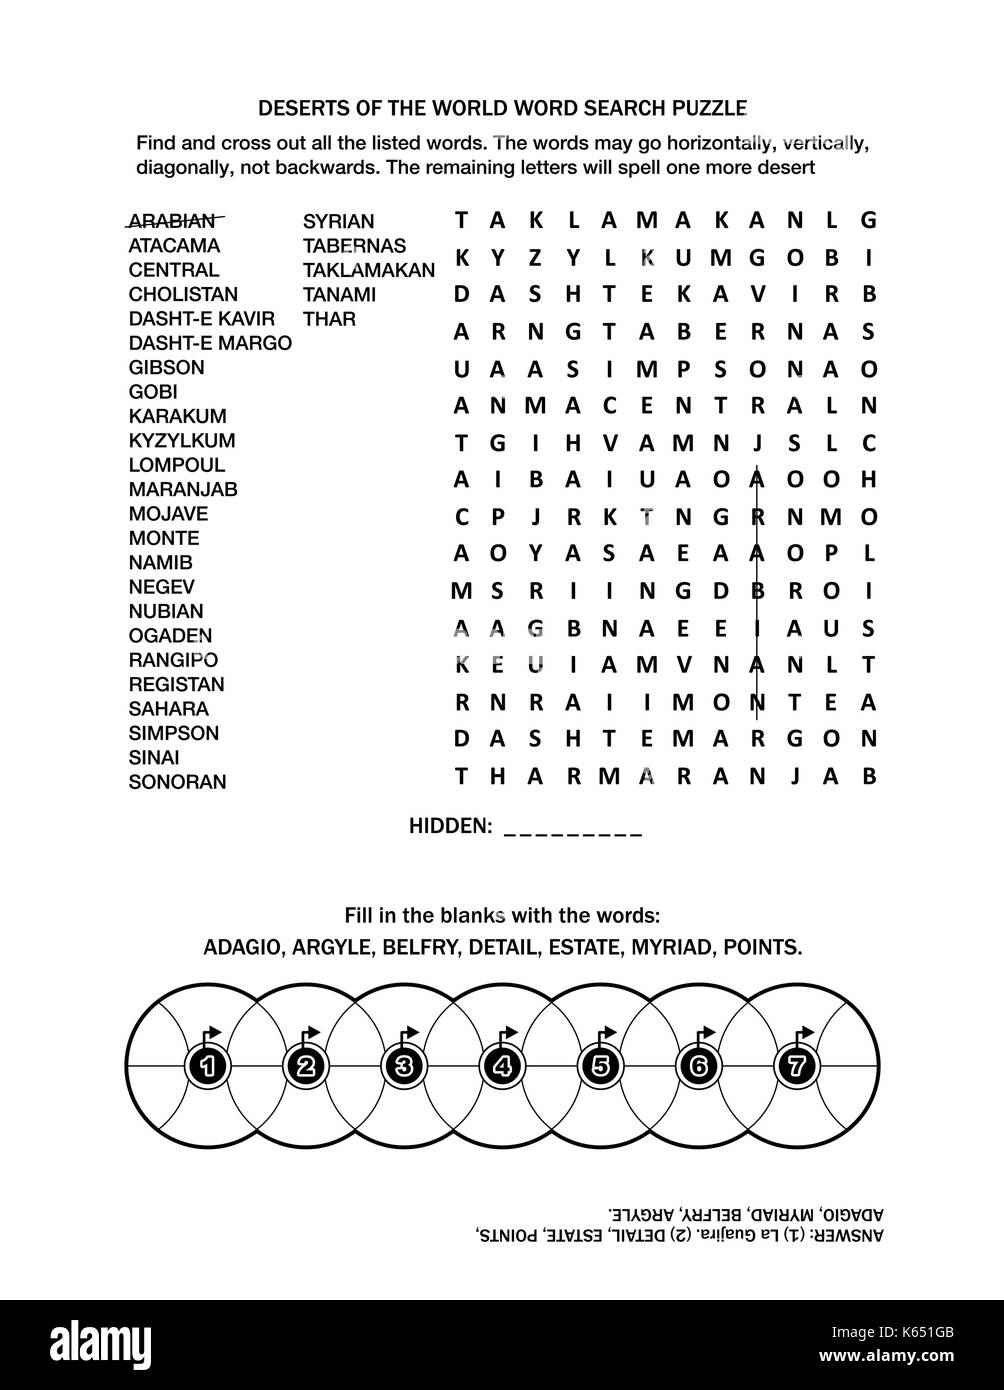 Puzzle page with two word games (English language). Deserts of the world word search puzzle and fill the wheels. Black and white, A4 or letter sized. Stock Vector